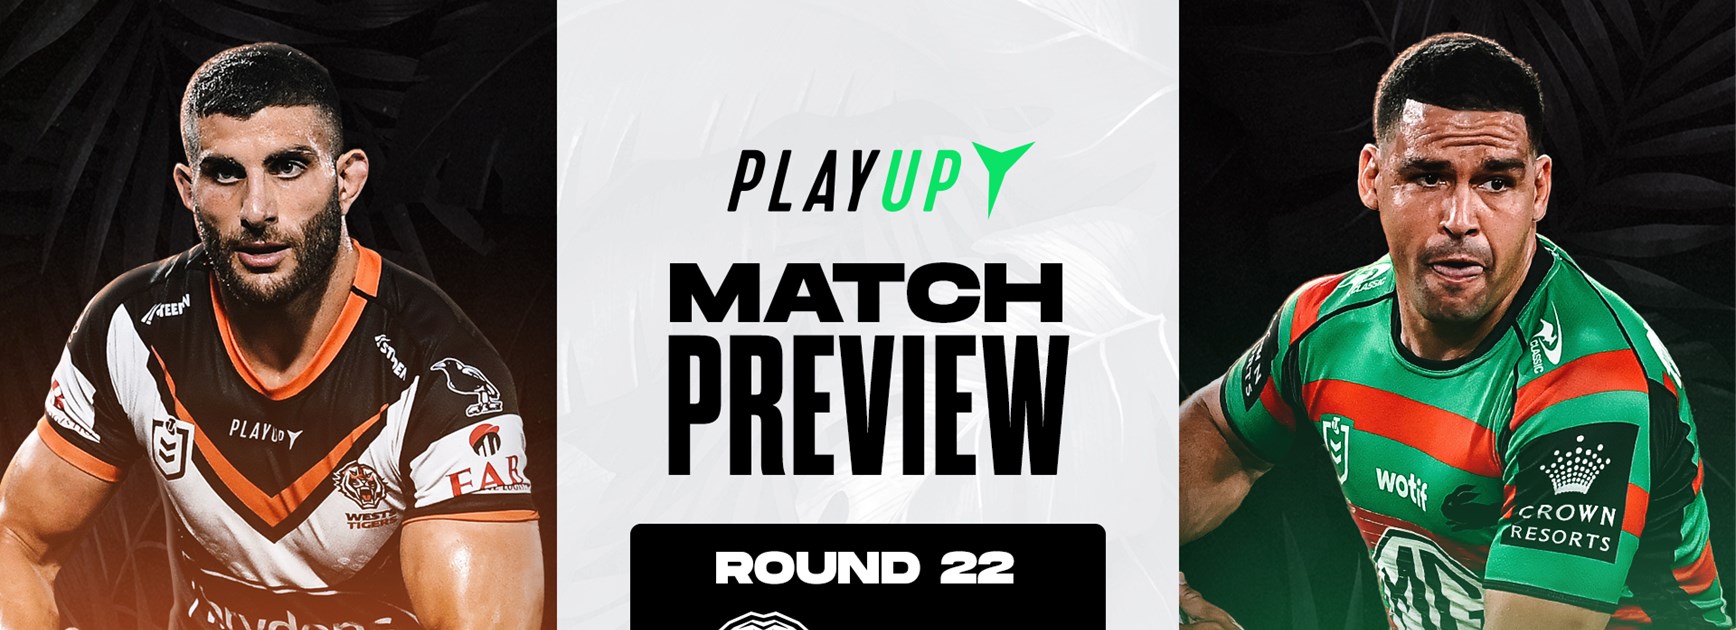 Match Preview: Round 22 vs Rabbitohs